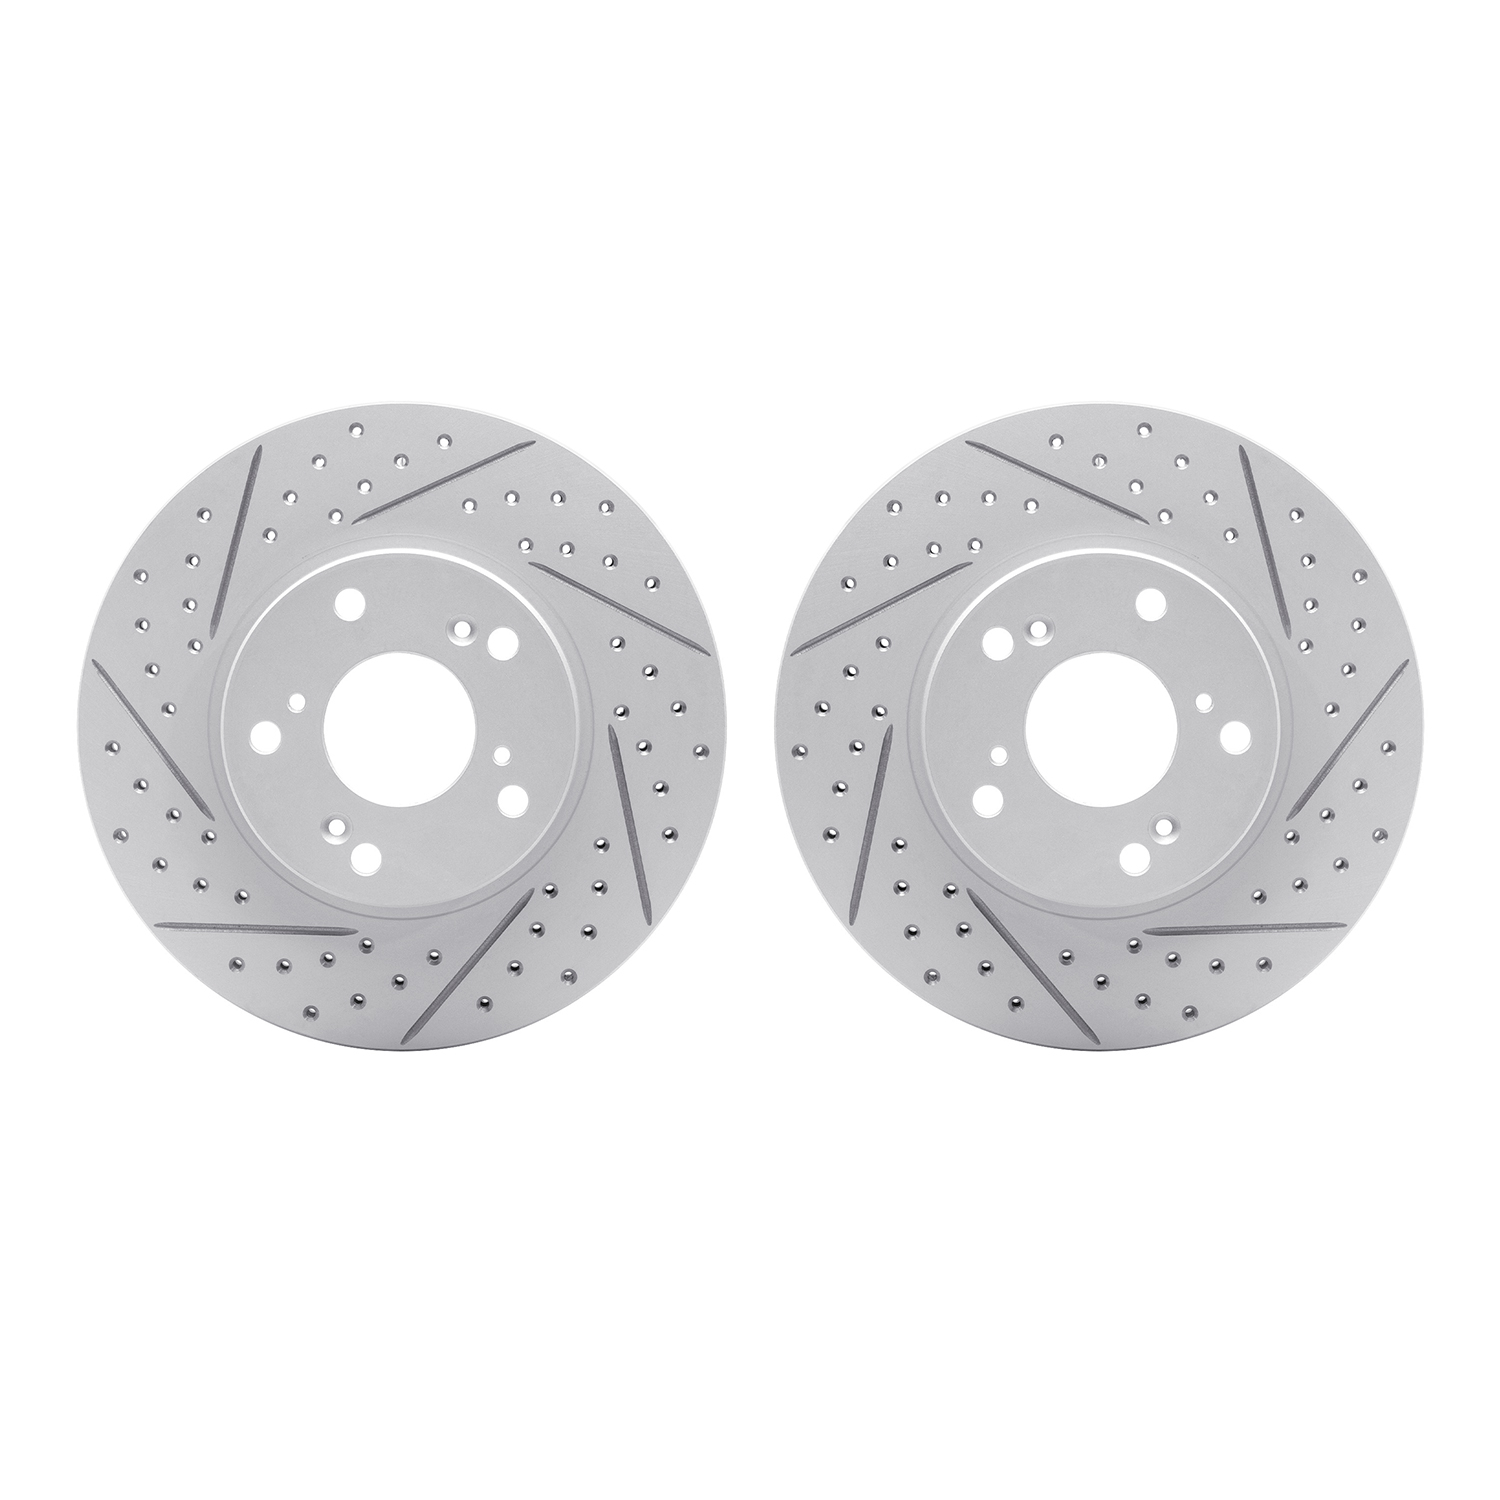 2002-59003 Geoperformance Drilled/Slotted Brake Rotors, 1998-2021 Acura/Honda, Position: Front